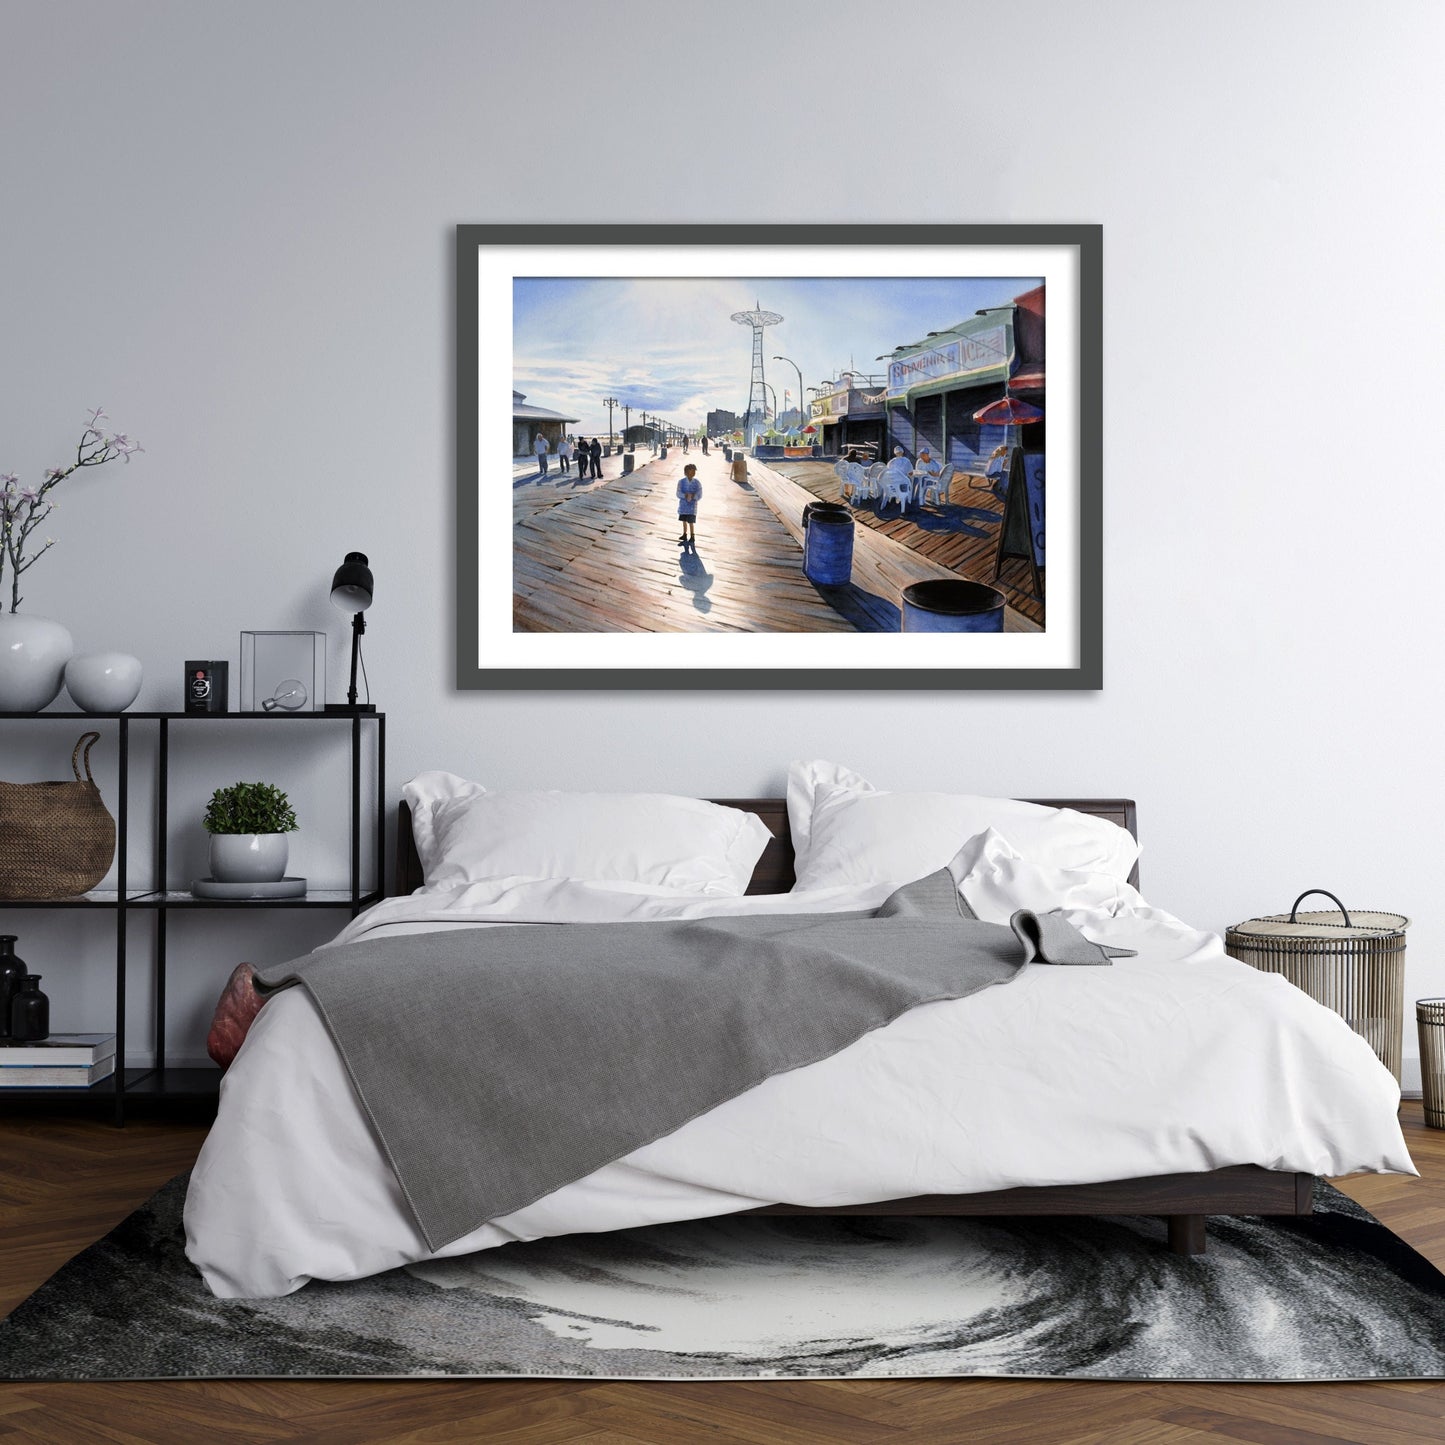 Coney Island Art, Oversized Framed Wall Art, Above Bed Decor, Canvas Print, Watercolor Painting, Living Room Art